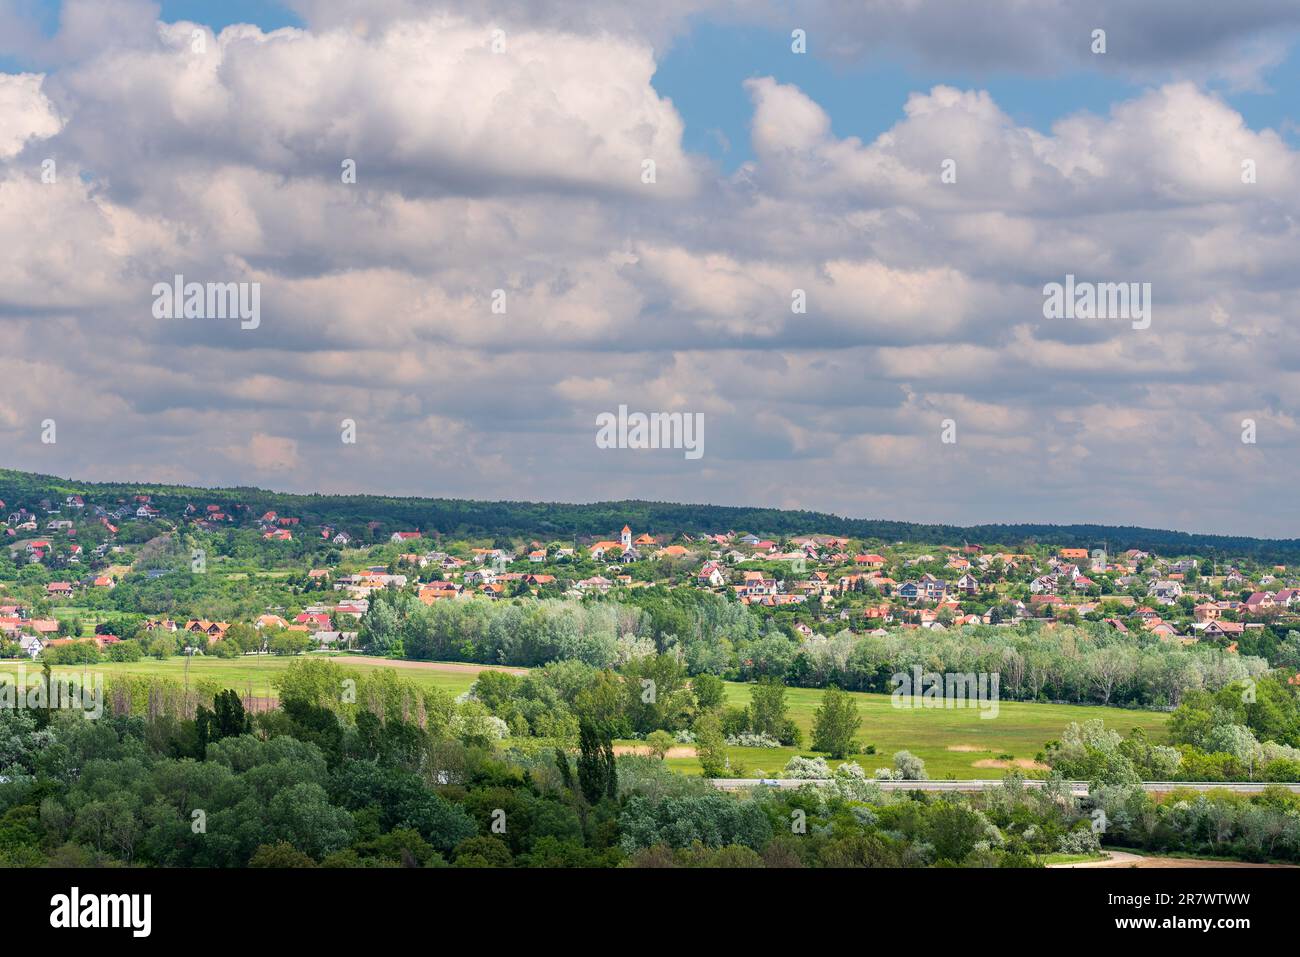 The village of Sukoro in Hungary, view from the lookout. Sukoro is a village in Fejer county, Hungary. Stock Photo